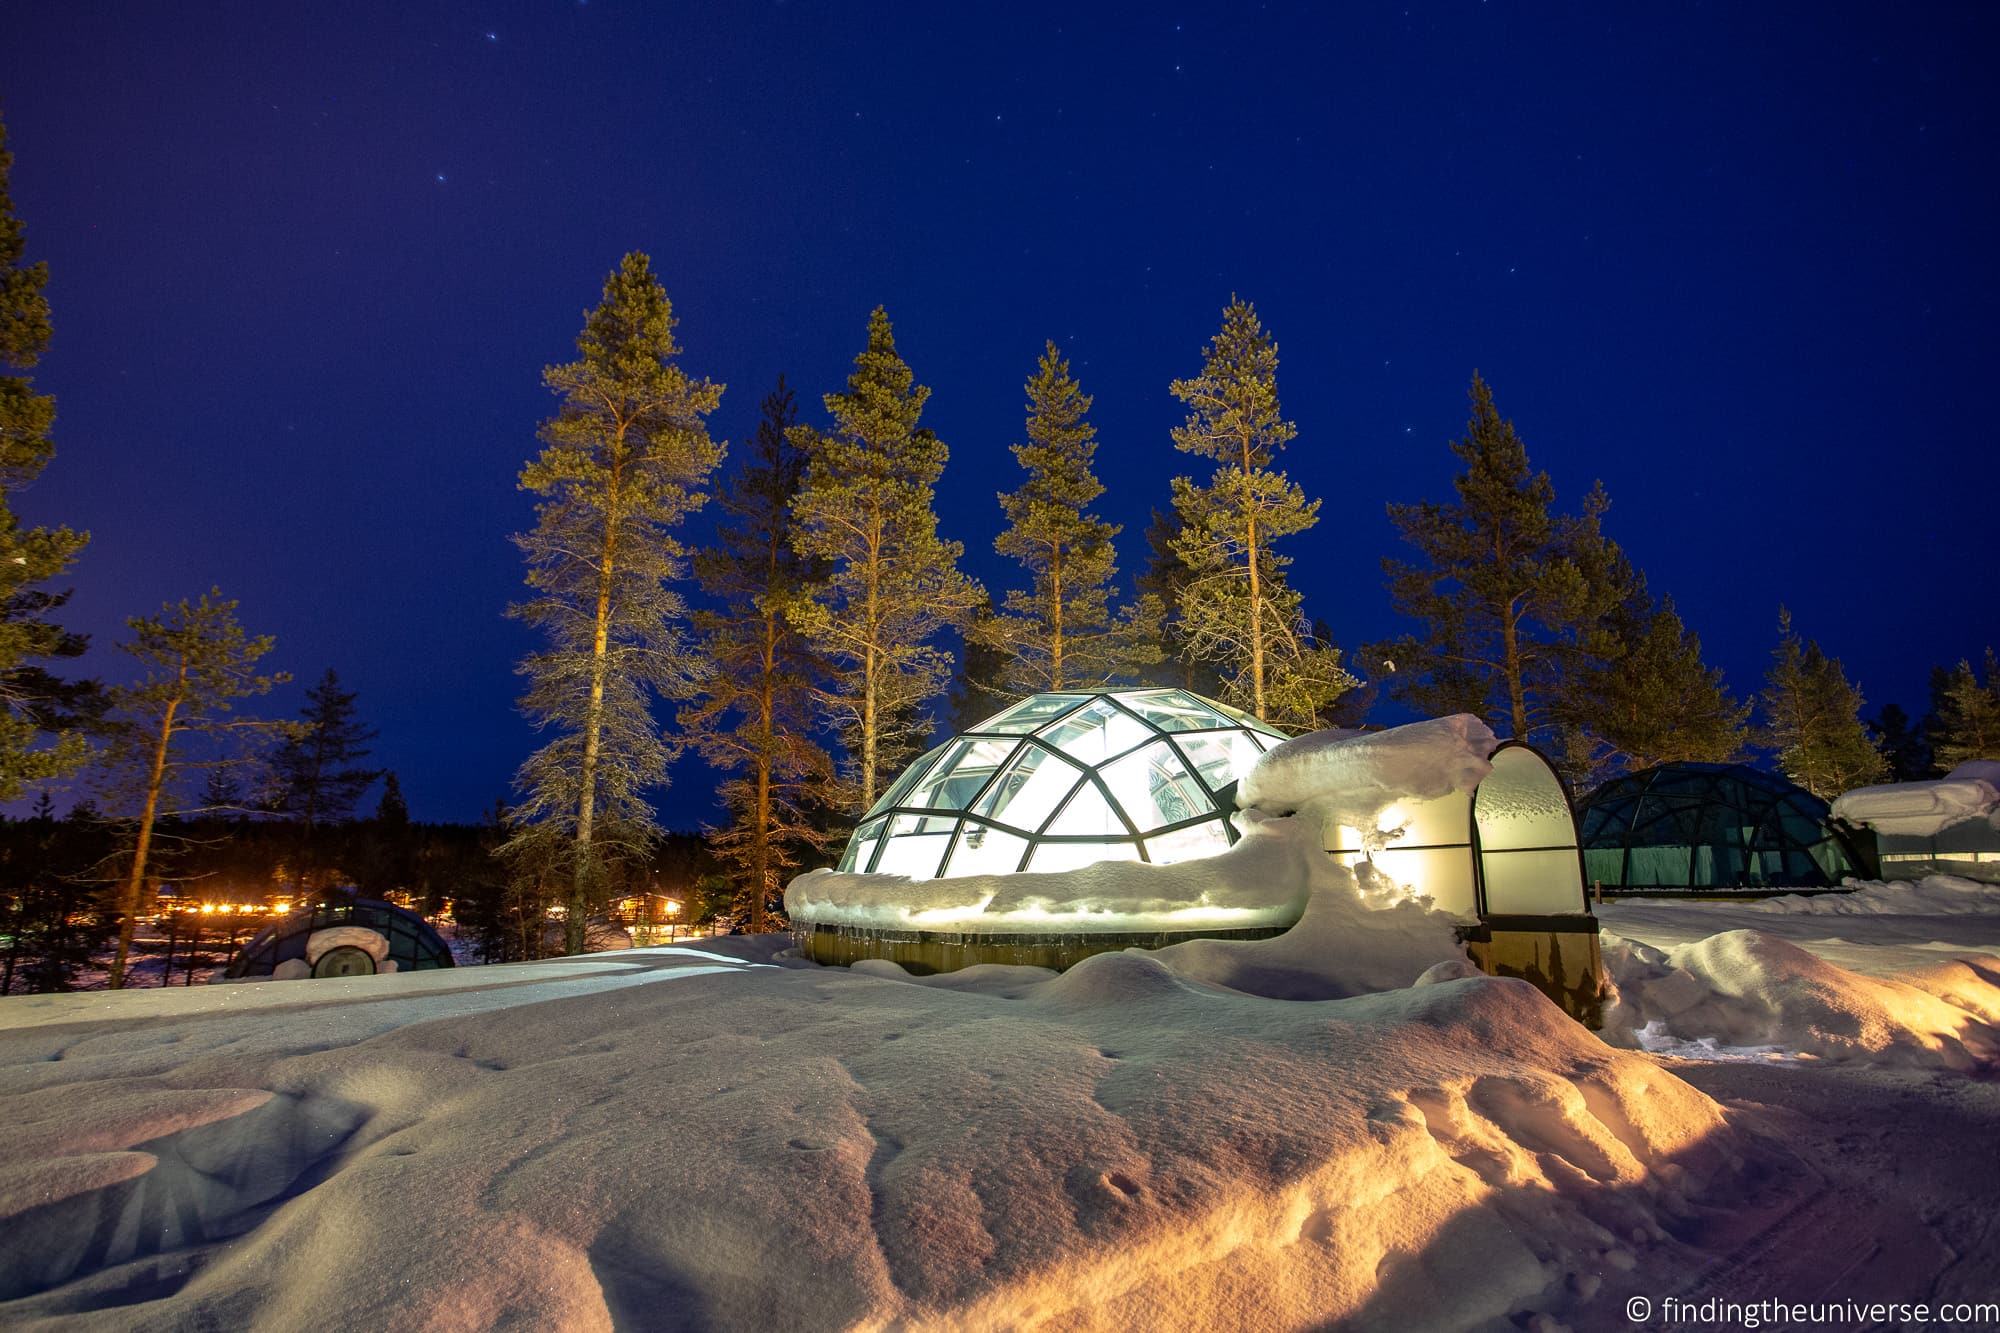 The Ultimate 7 Day Finland Itinerary for Winter